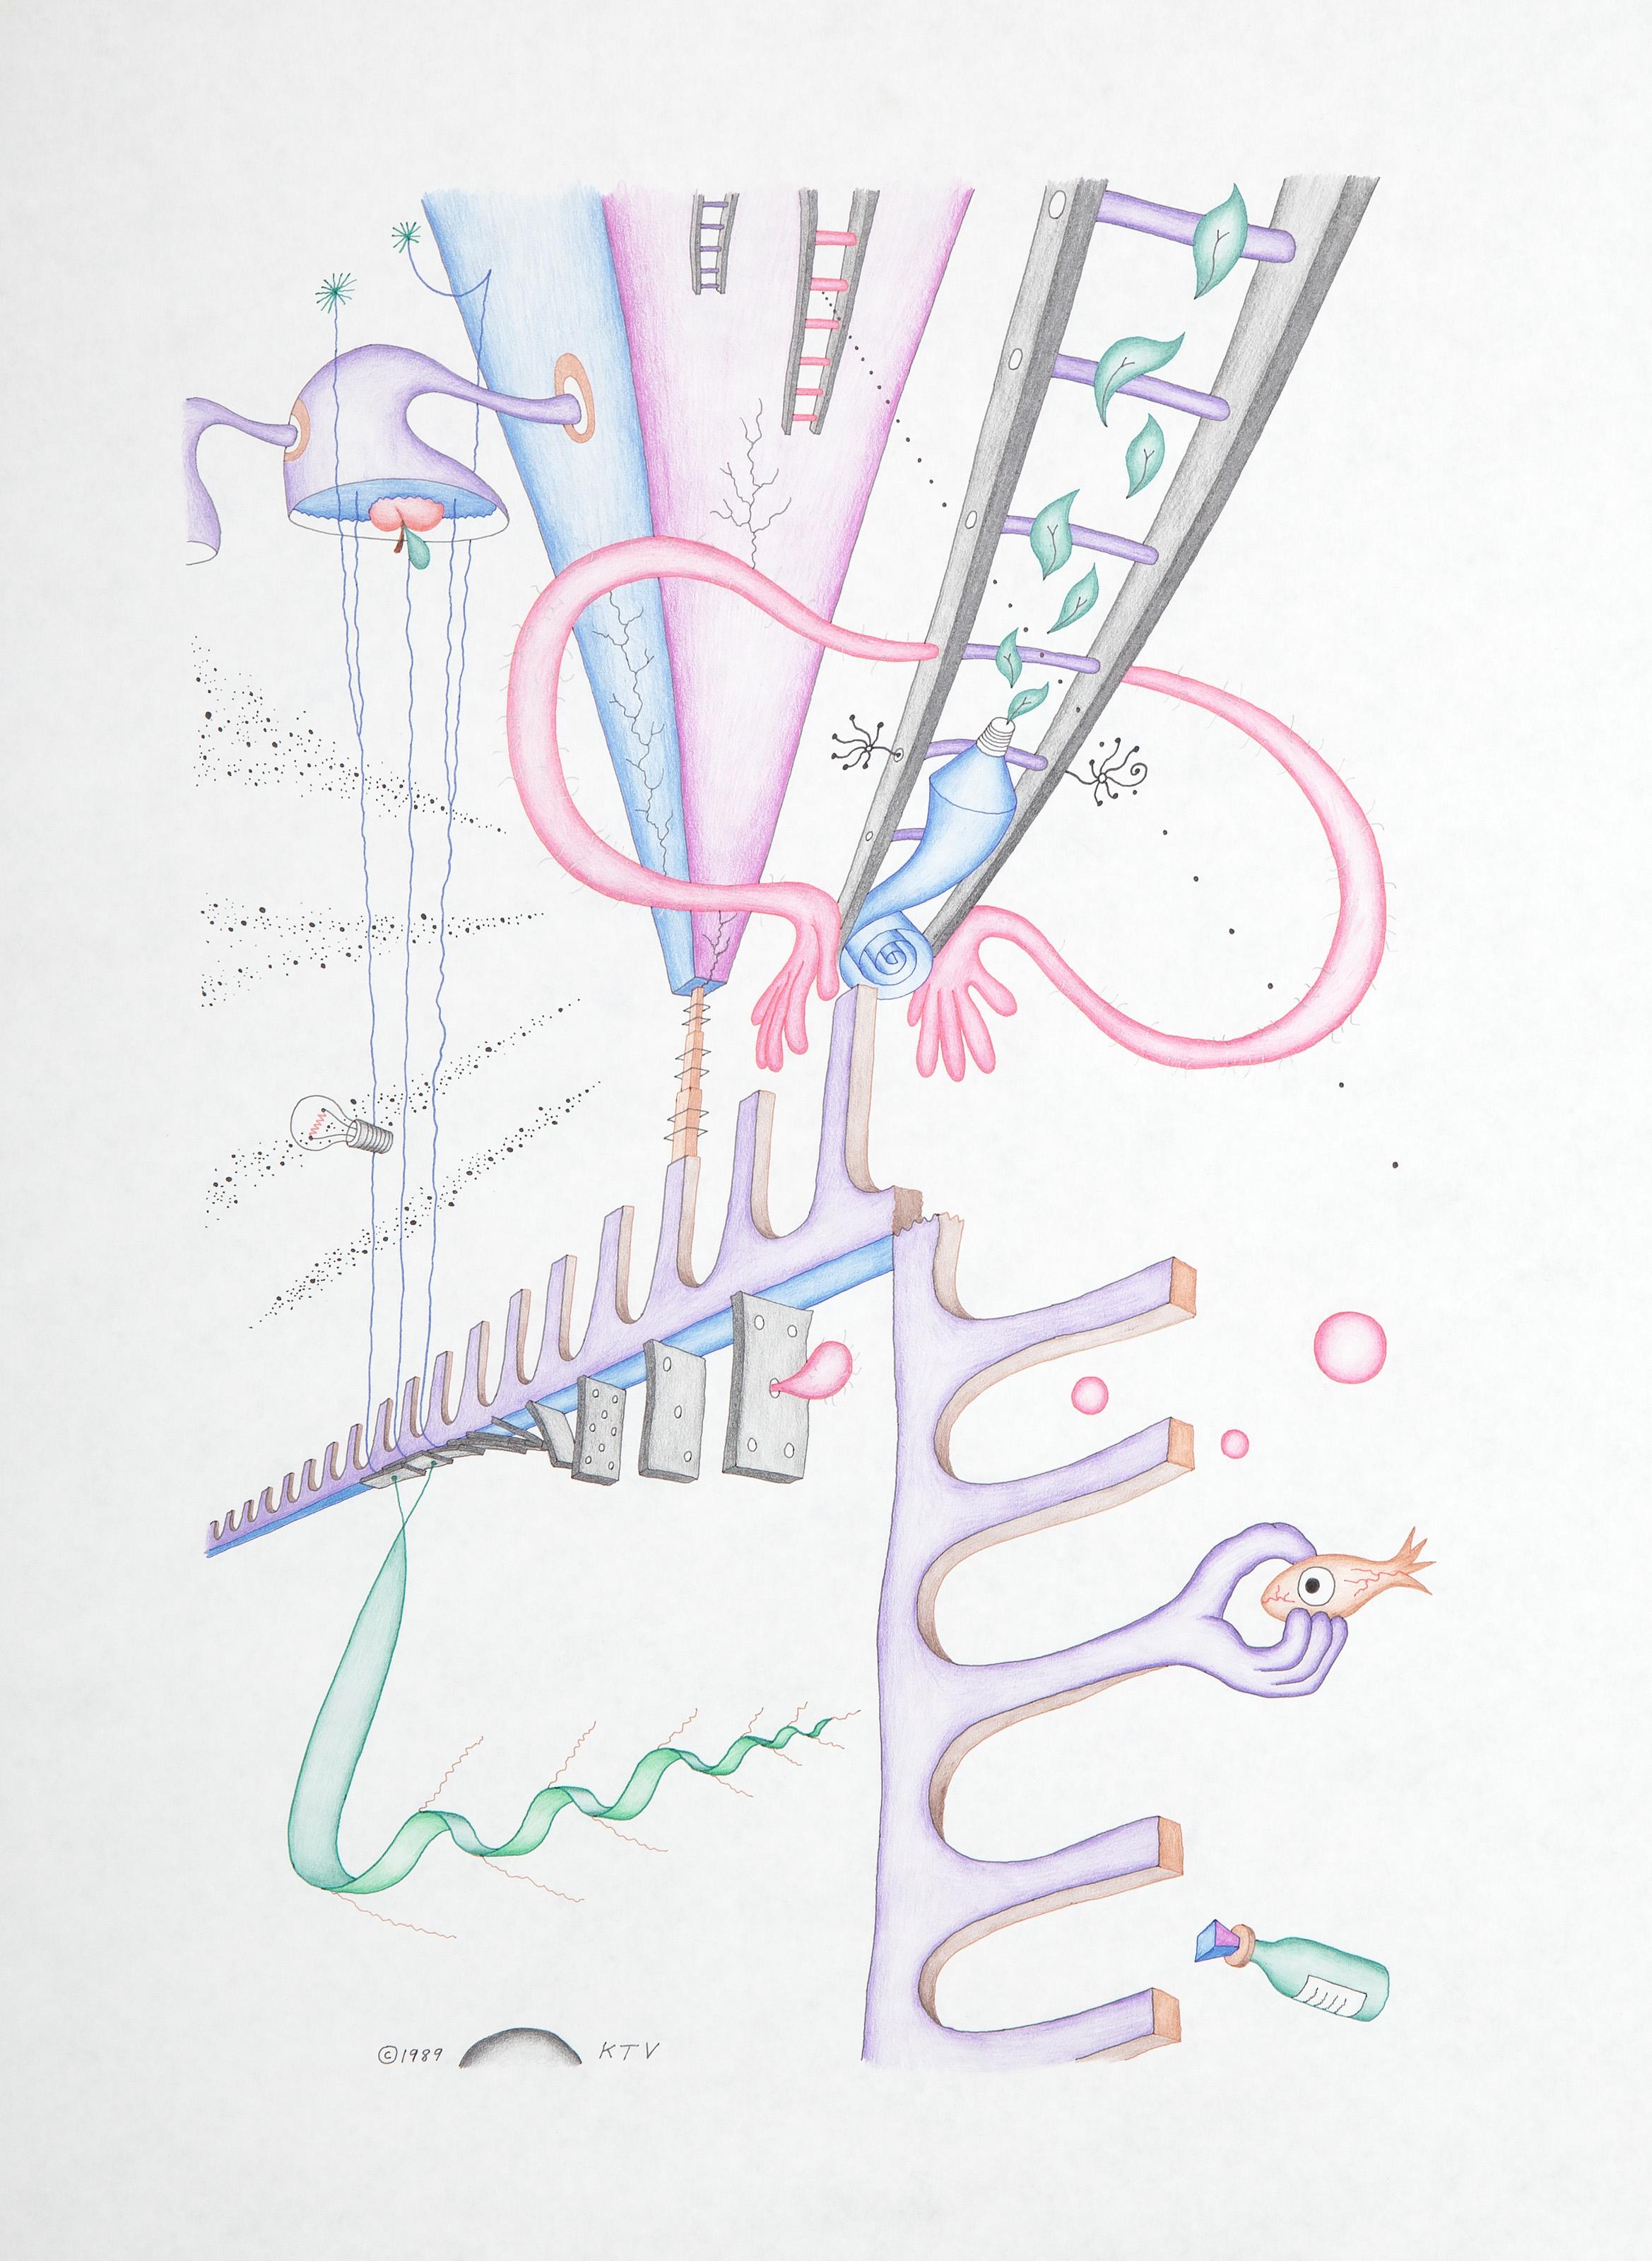 Kevin Varner, American (1954 - 2019) -  Influence of Pyramid Energy on Giant Bacteria. Year: 1991, Medium: Color Pencil and Ink on Paper, signed and dated lower left, Size: 24 x 18 in. (60.96 x 45.72 cm) 